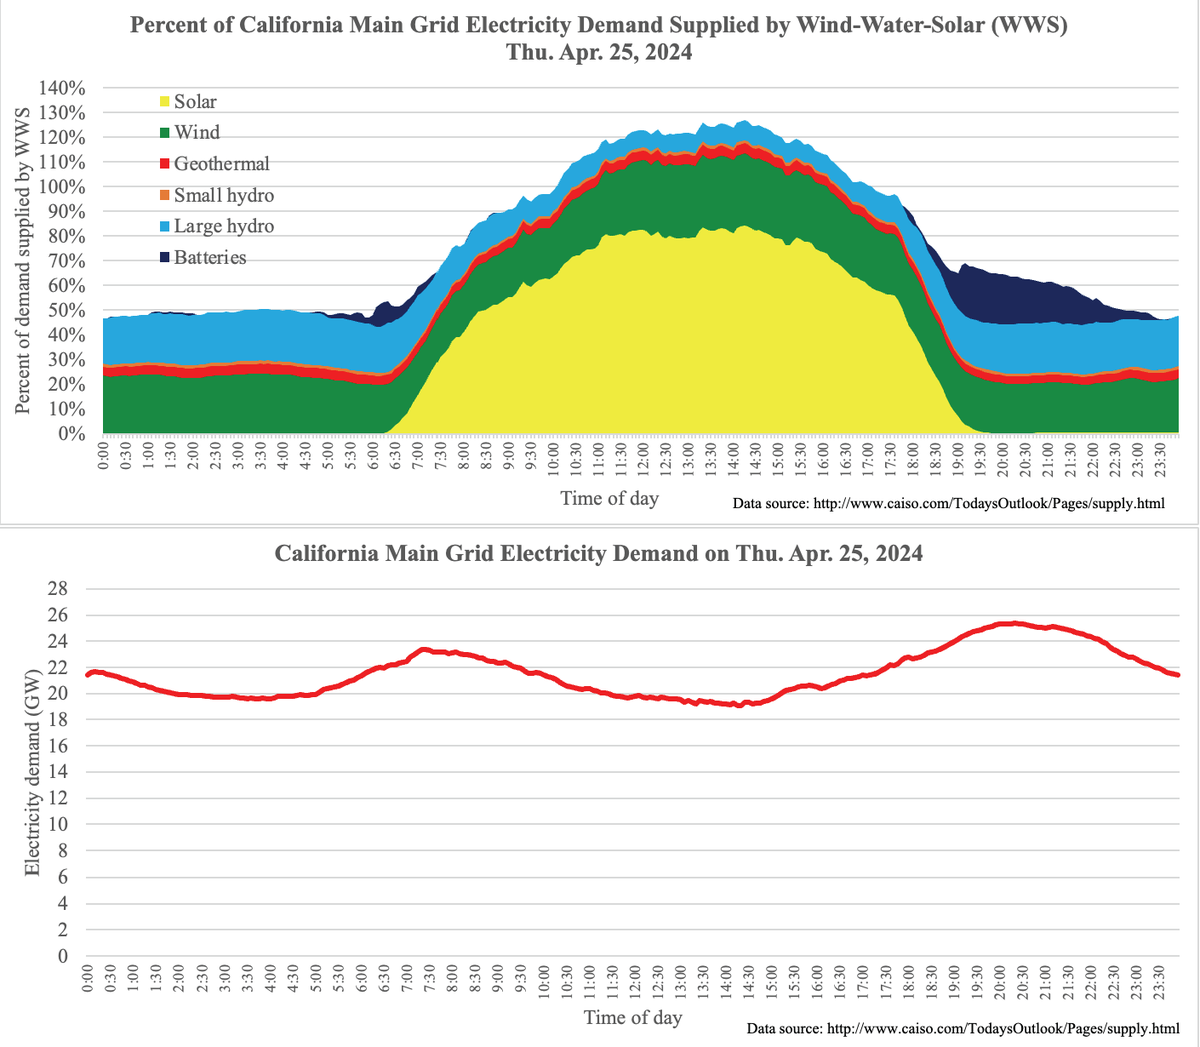 New record: 12th day in a row (on Thu, Apr 25) California supplied >100% of its demand with #WindWaterSolar (and 41st of 49 last 49 days).

Peak: 127%
Hours >100%: 6.92
Minimum 46.2%
Avg: 74.9%